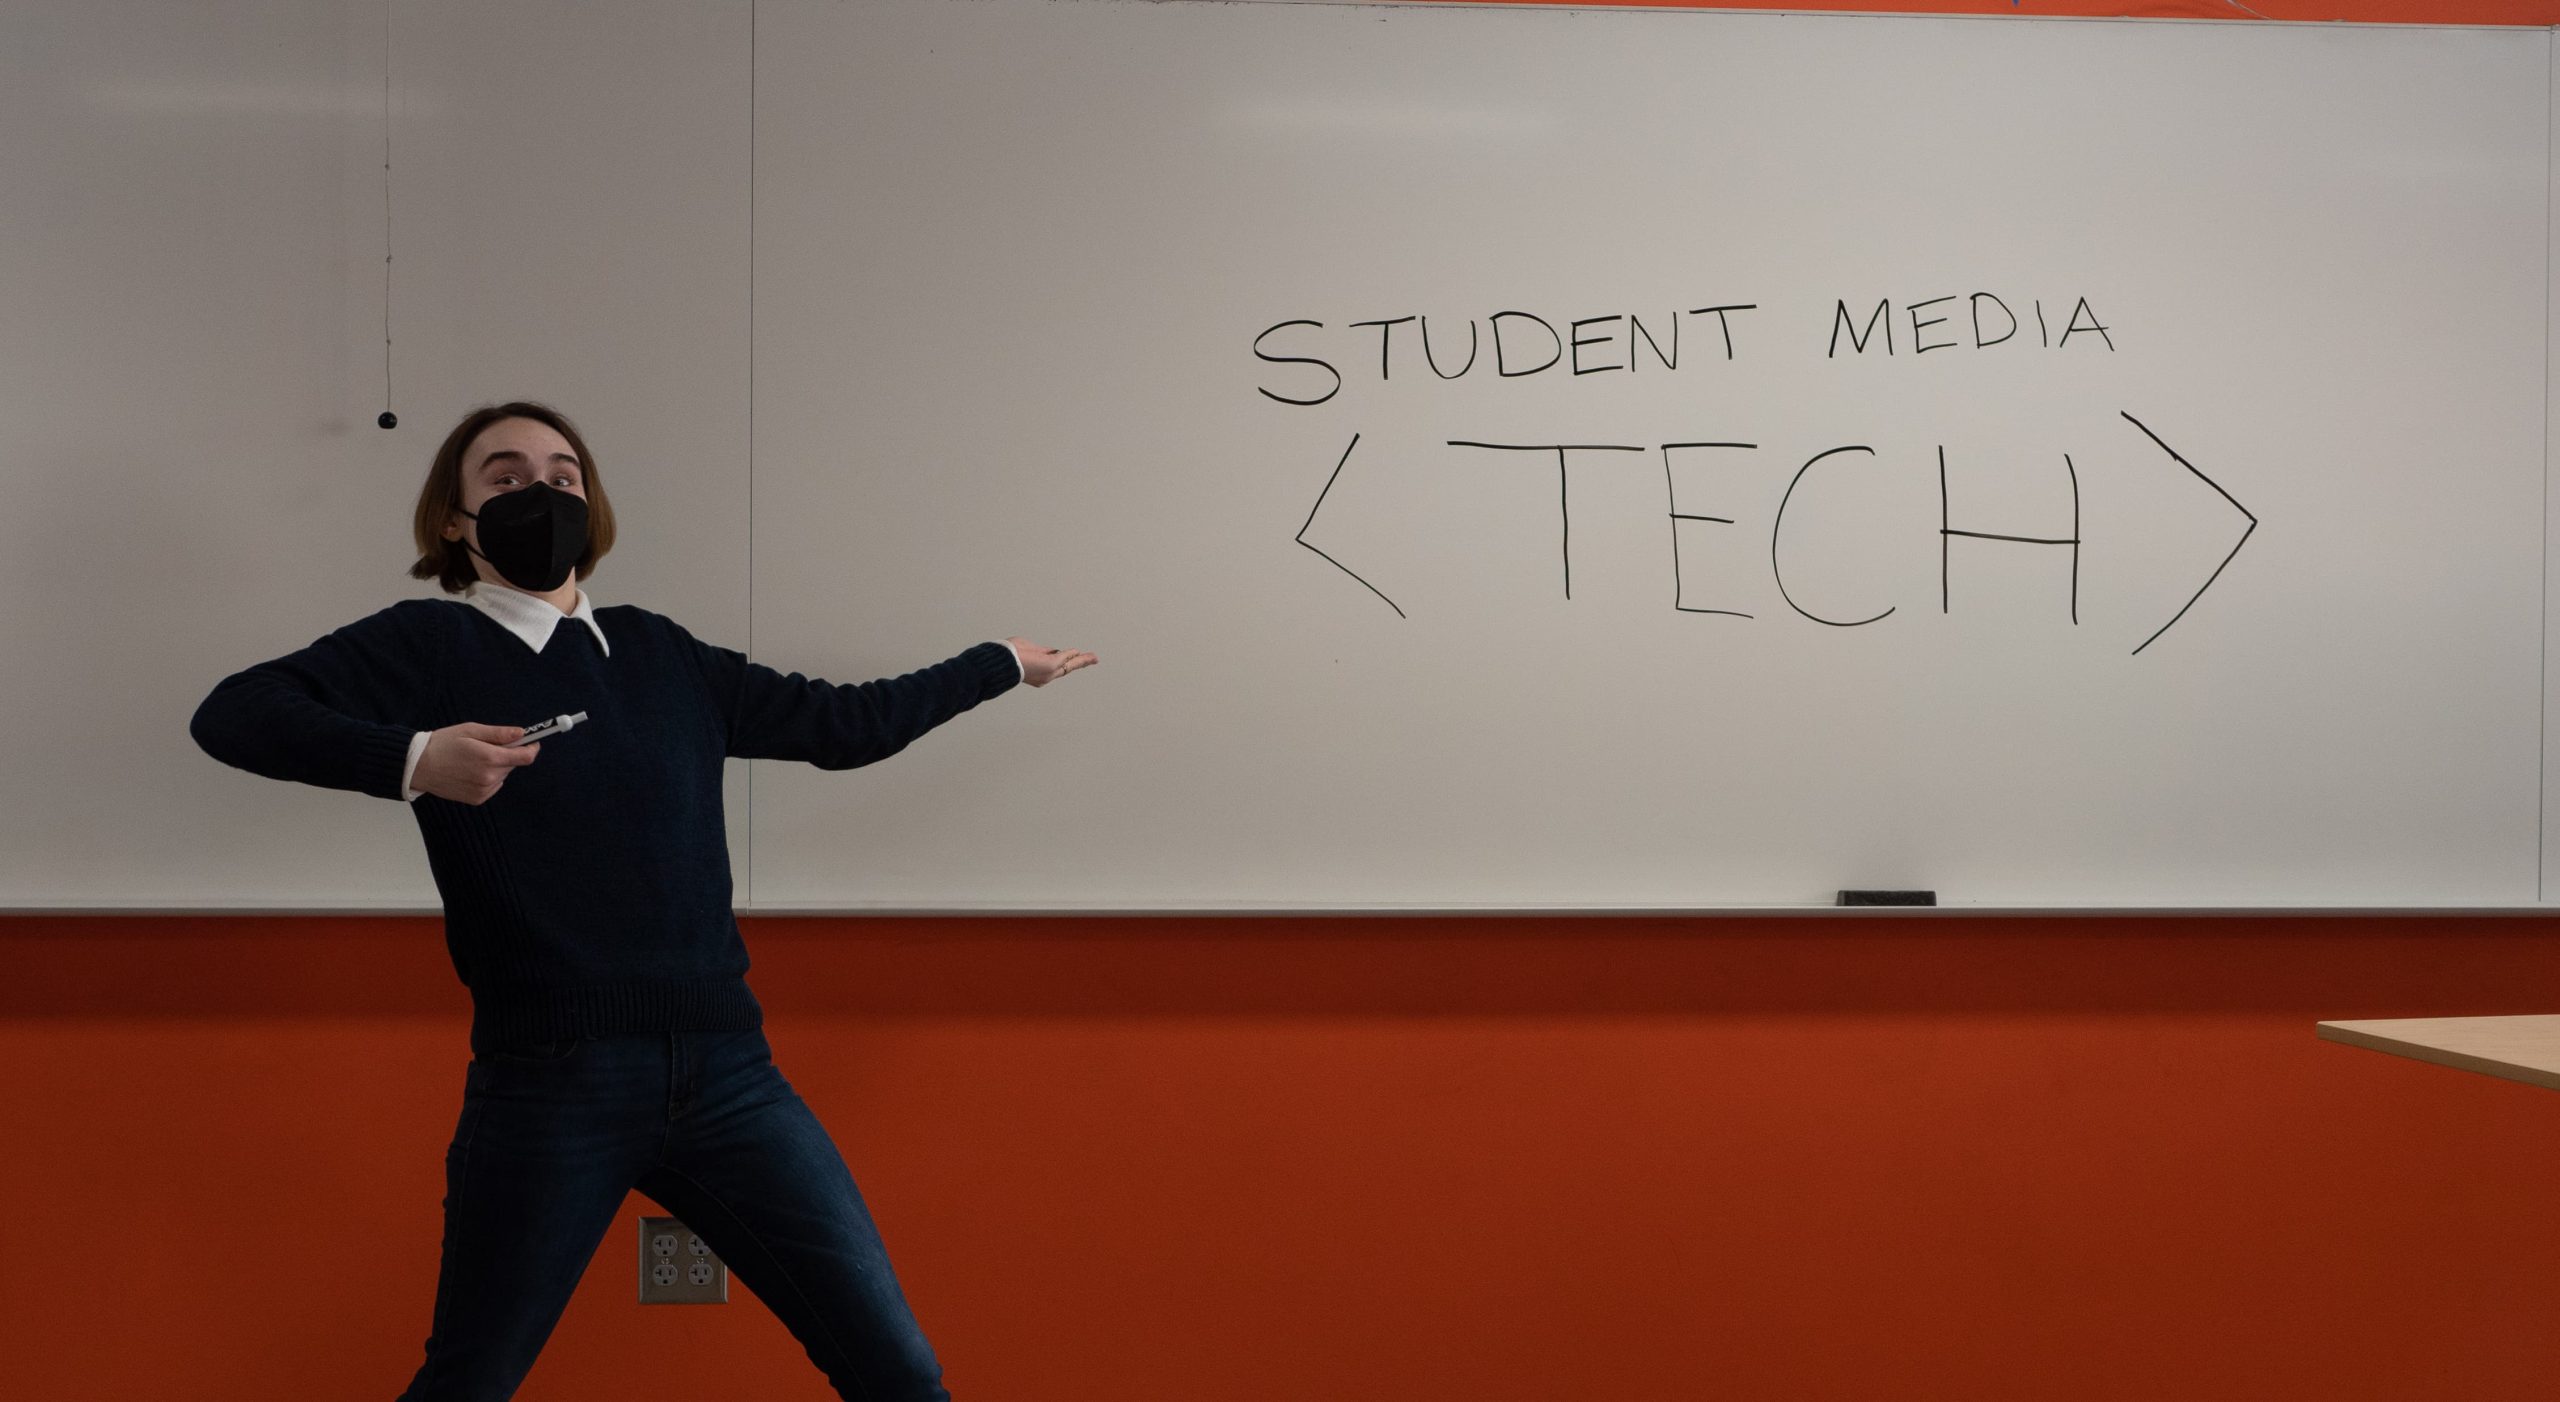 a photo of a person pointing at a whiteboard that reads "student media tech." The photo cuts off at the persons hip level